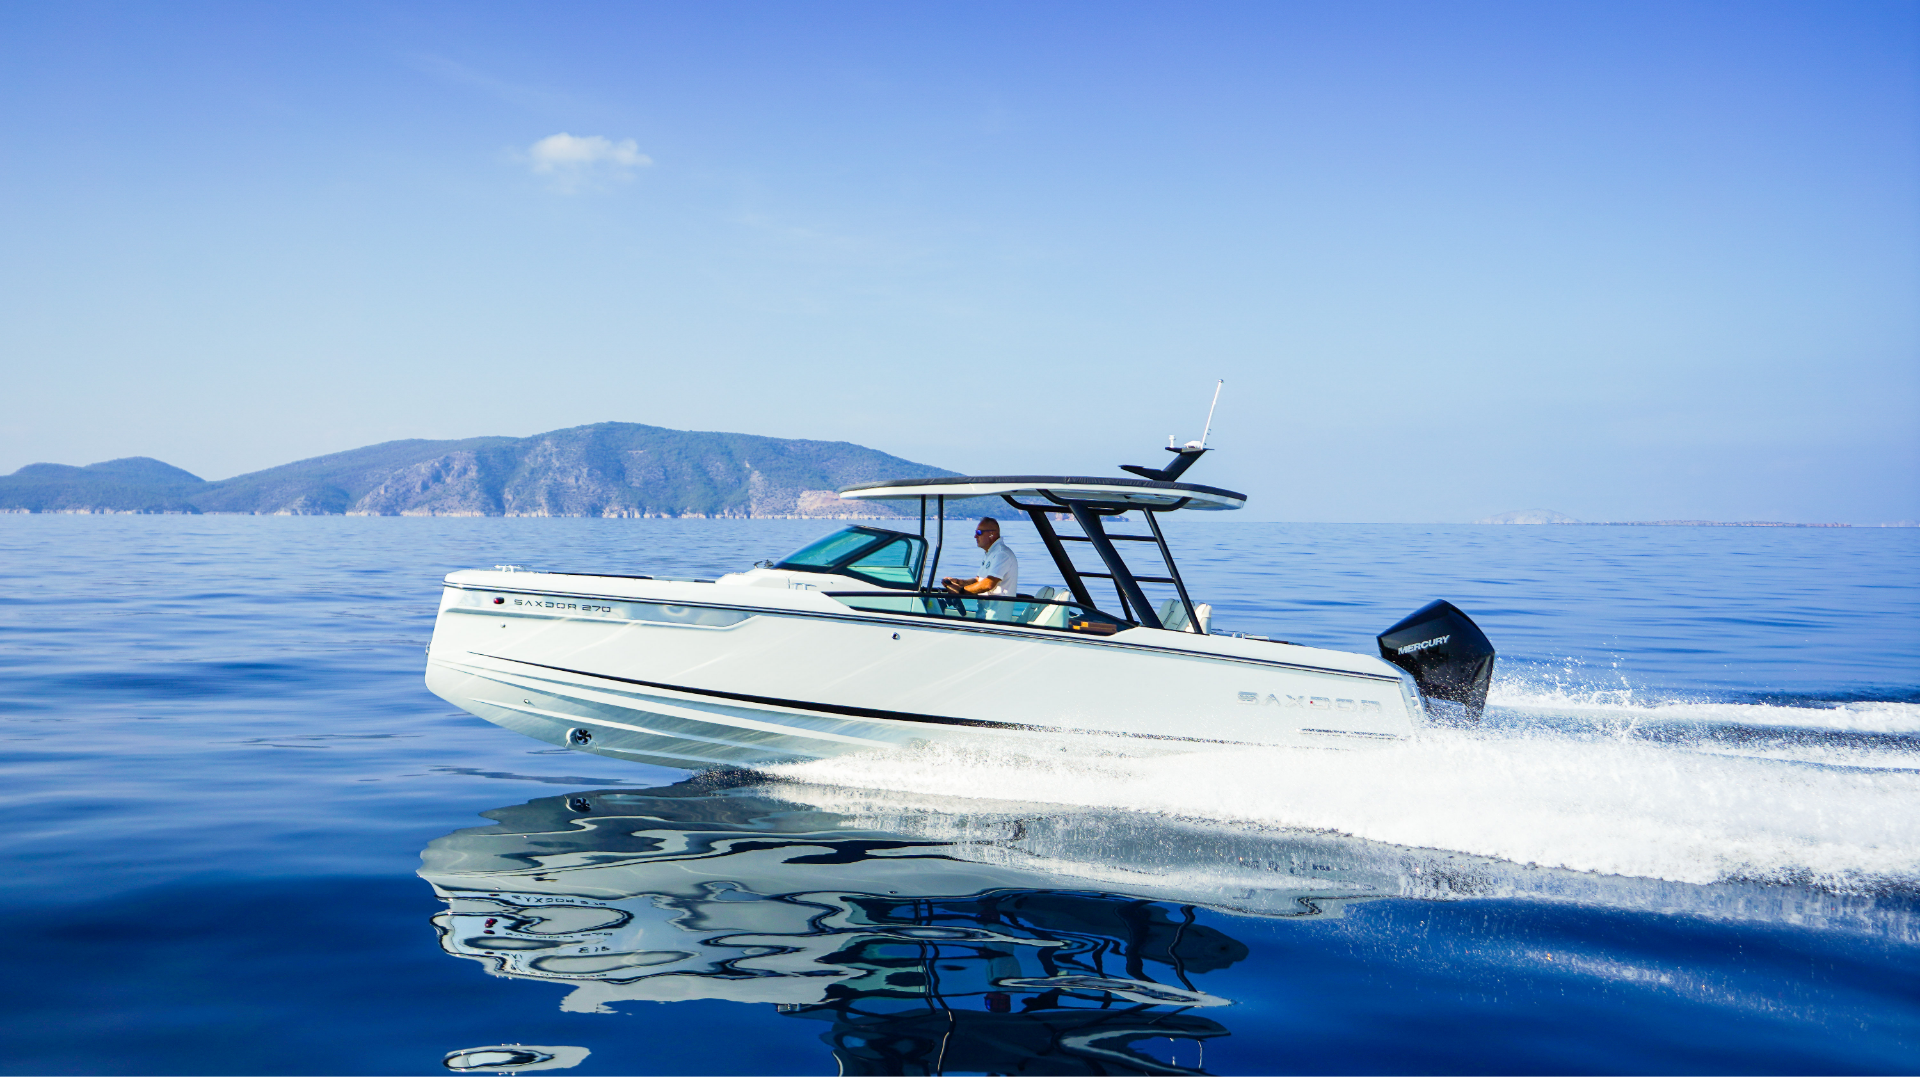 Originating from a vision to create a boat fleet that has never existed before, Saxdor boats are built with the highest standards of cutting-edge technologies and attention to safety.